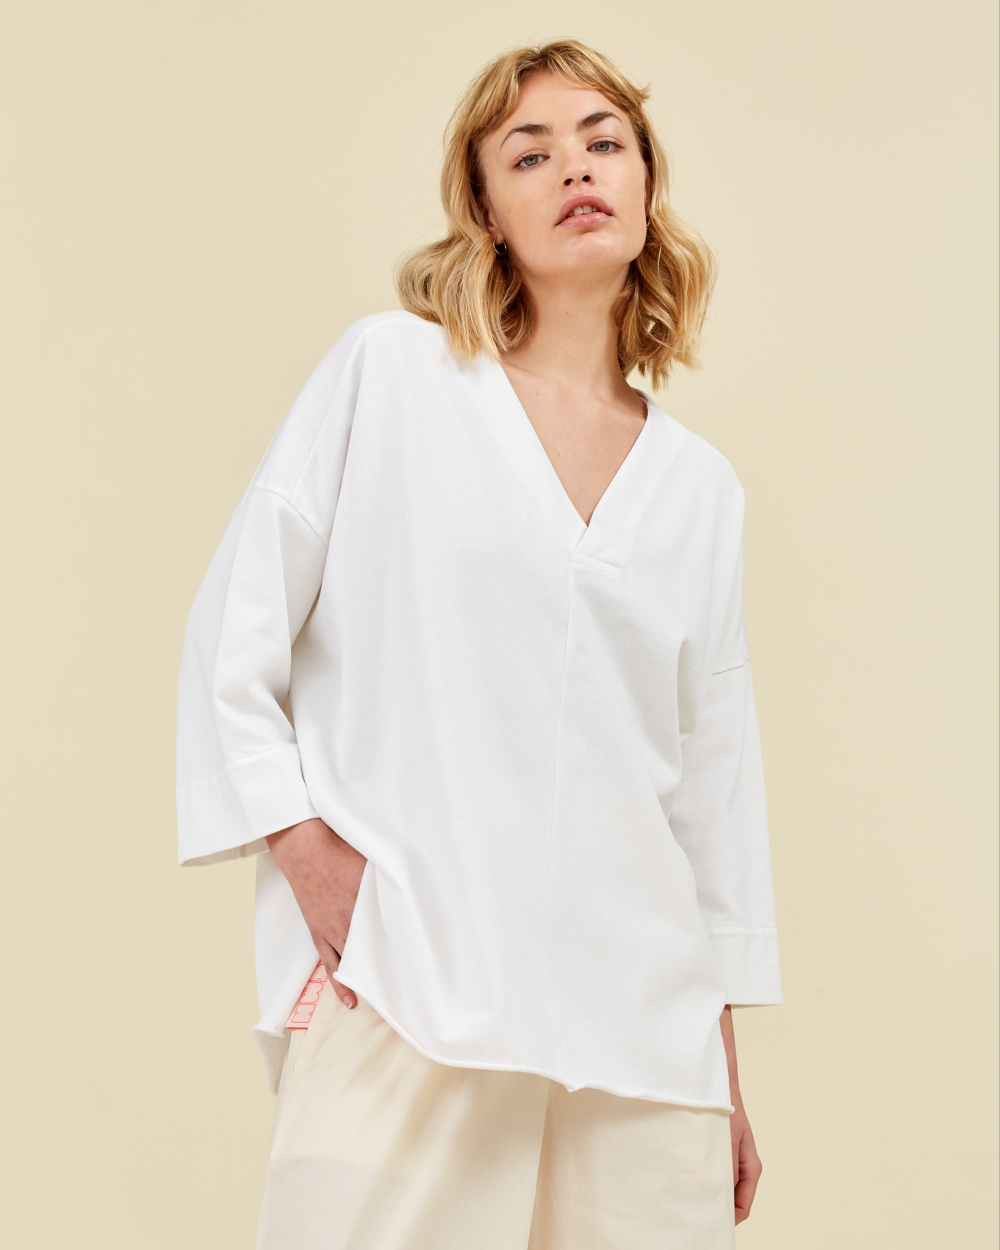 https://www.seamehappy.be/wp-content/uploads/2023/01/Sea-Me-Happy-Divya-Blouse-Jersey-white-front2.jpg